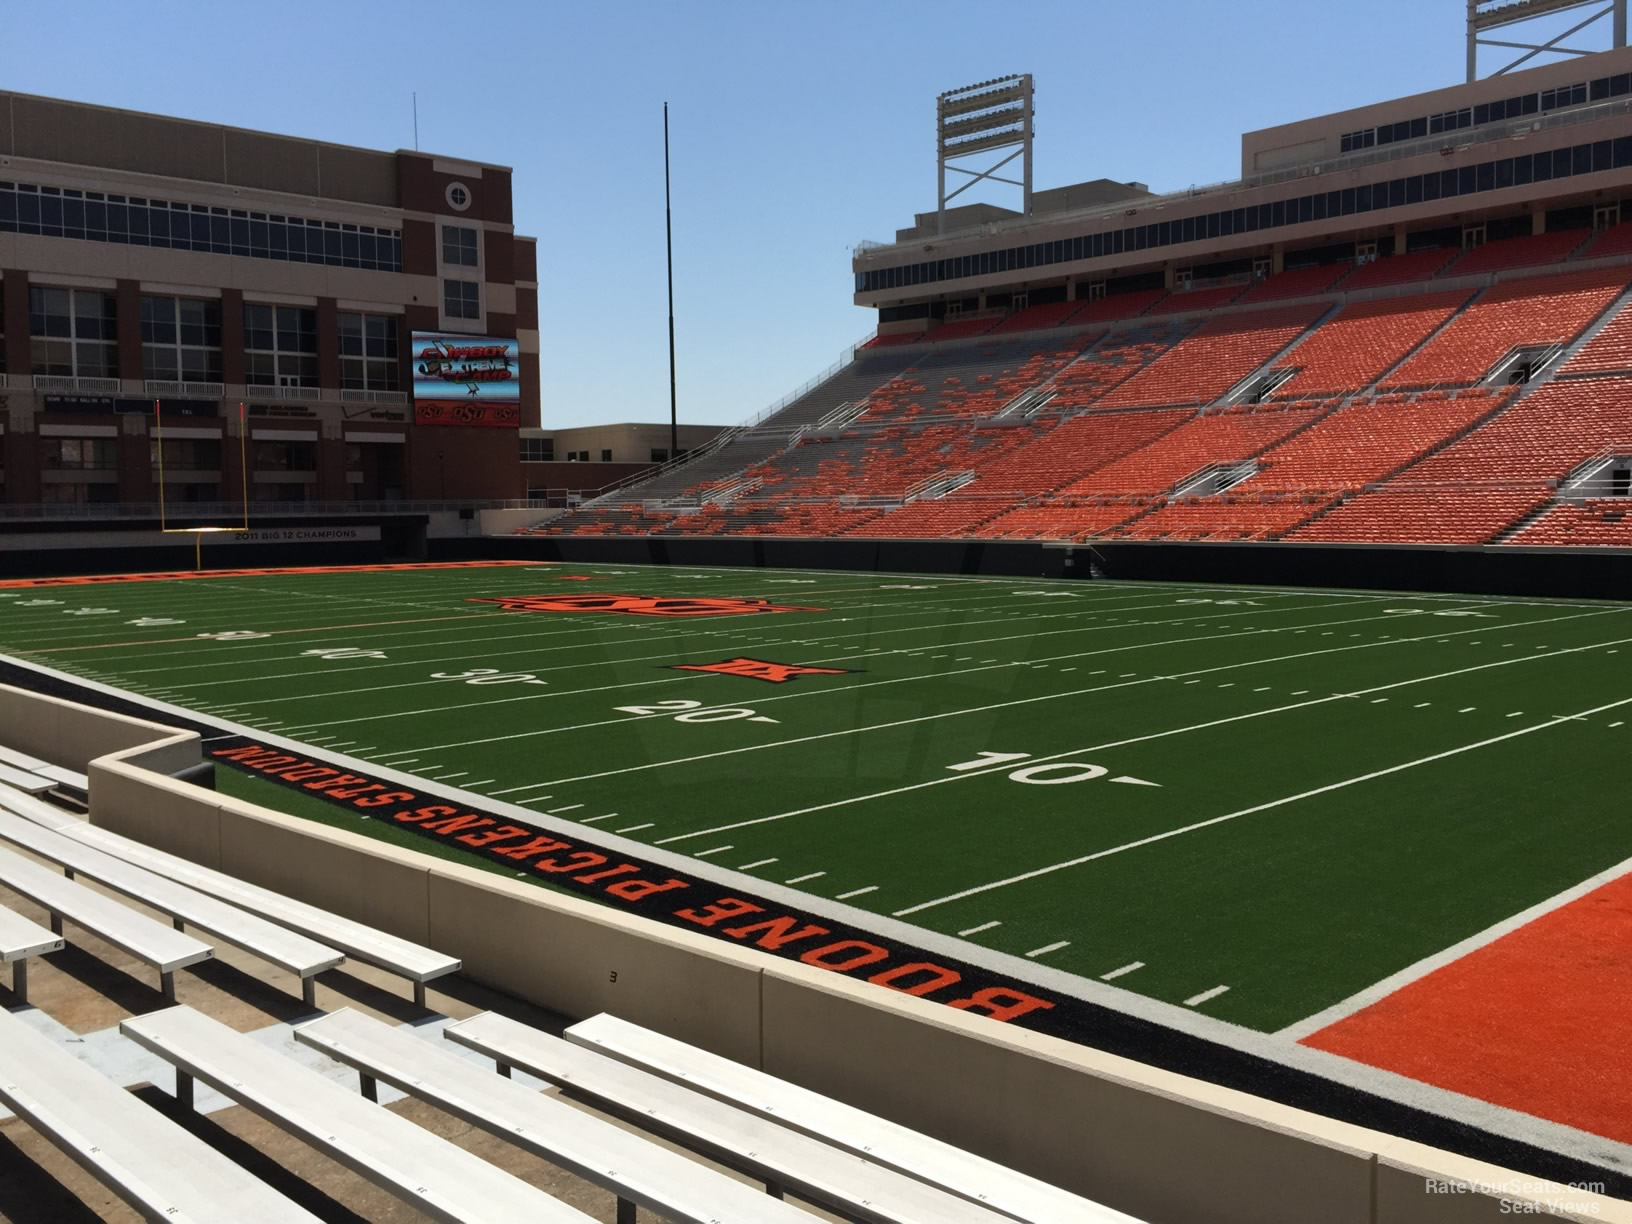 section 115, row 10 seat view  - boone pickens stadium